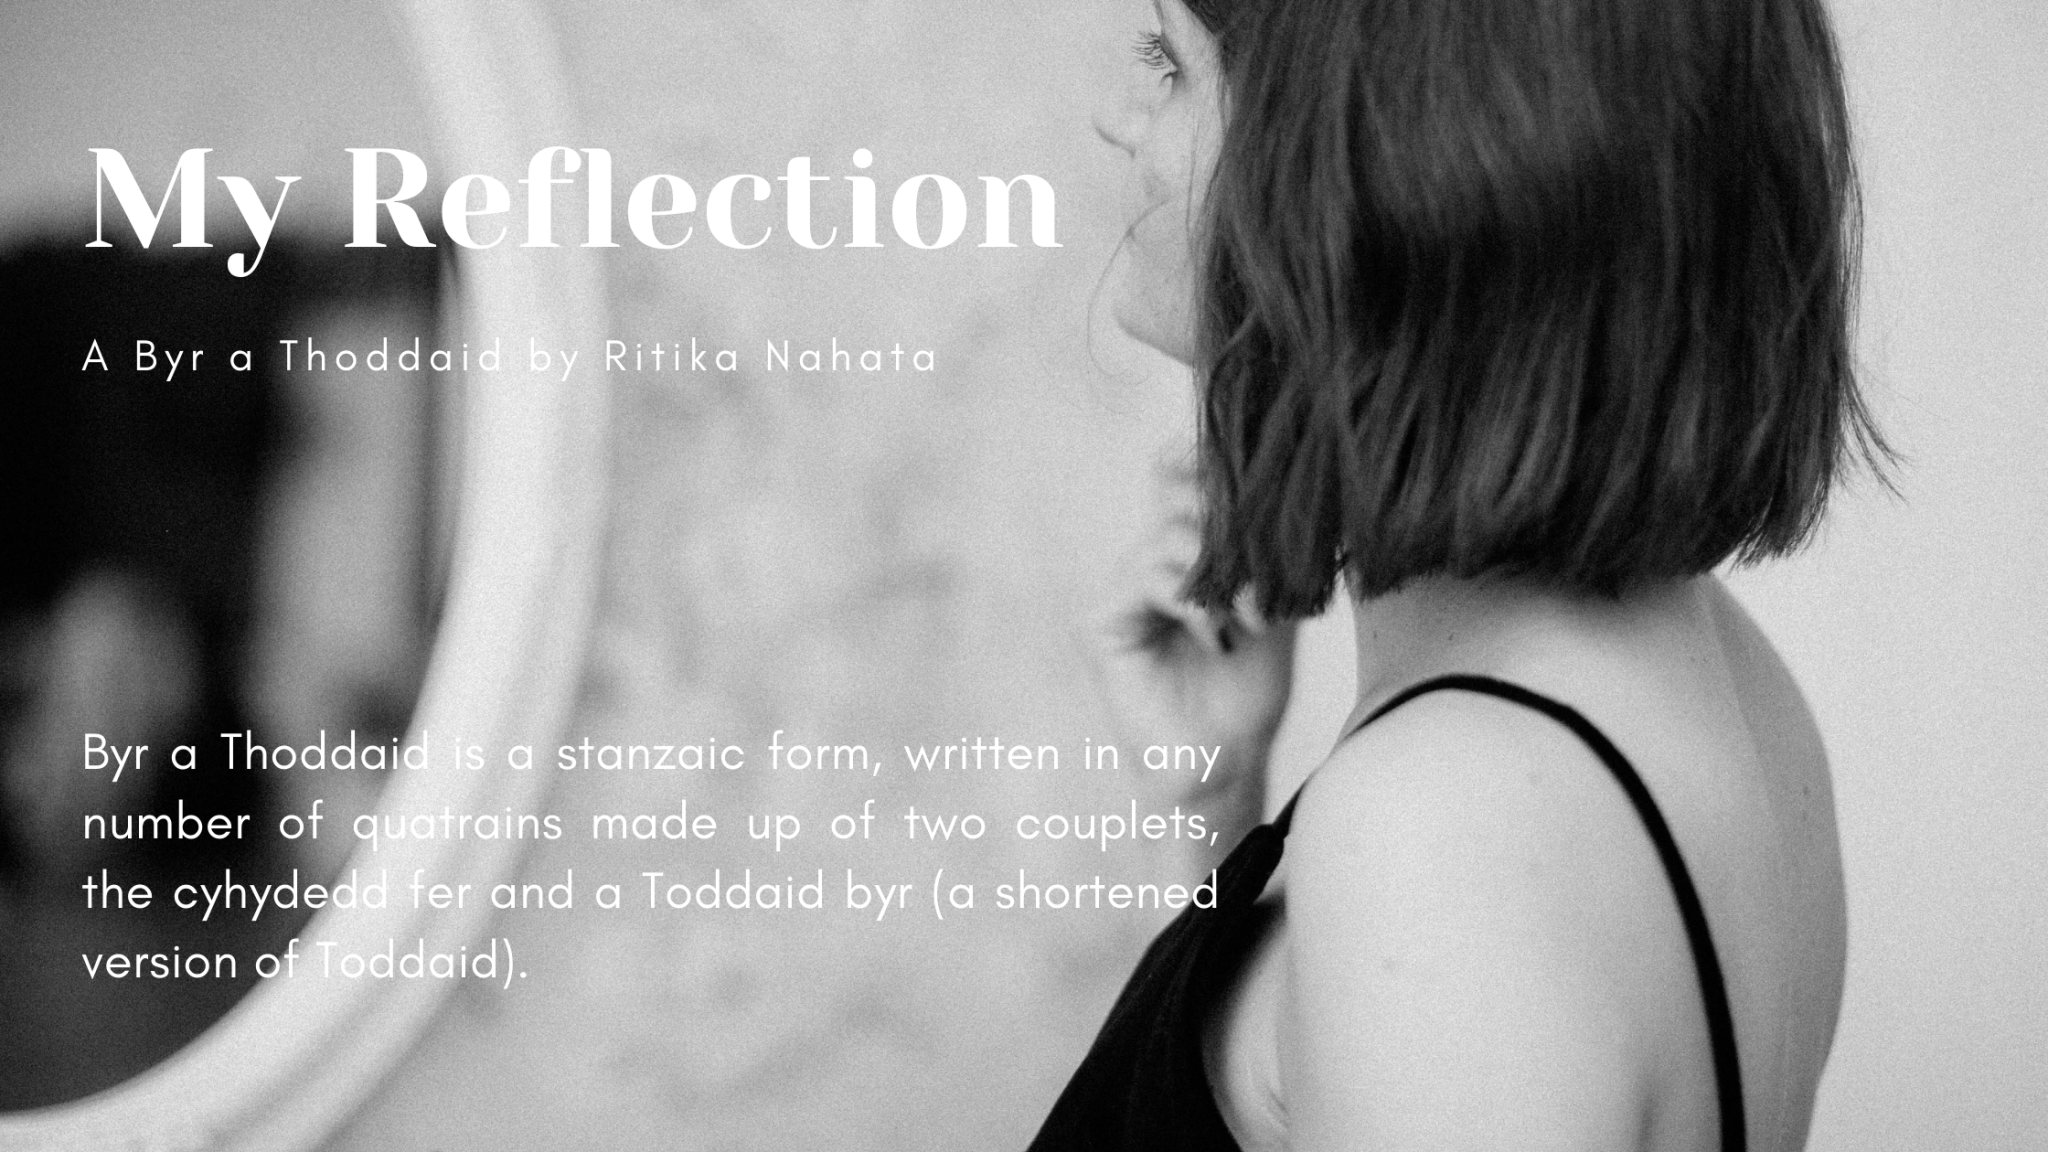 My Reflection | A Byr a Thoddaid Poem by Ritika Nahata at UpDivine